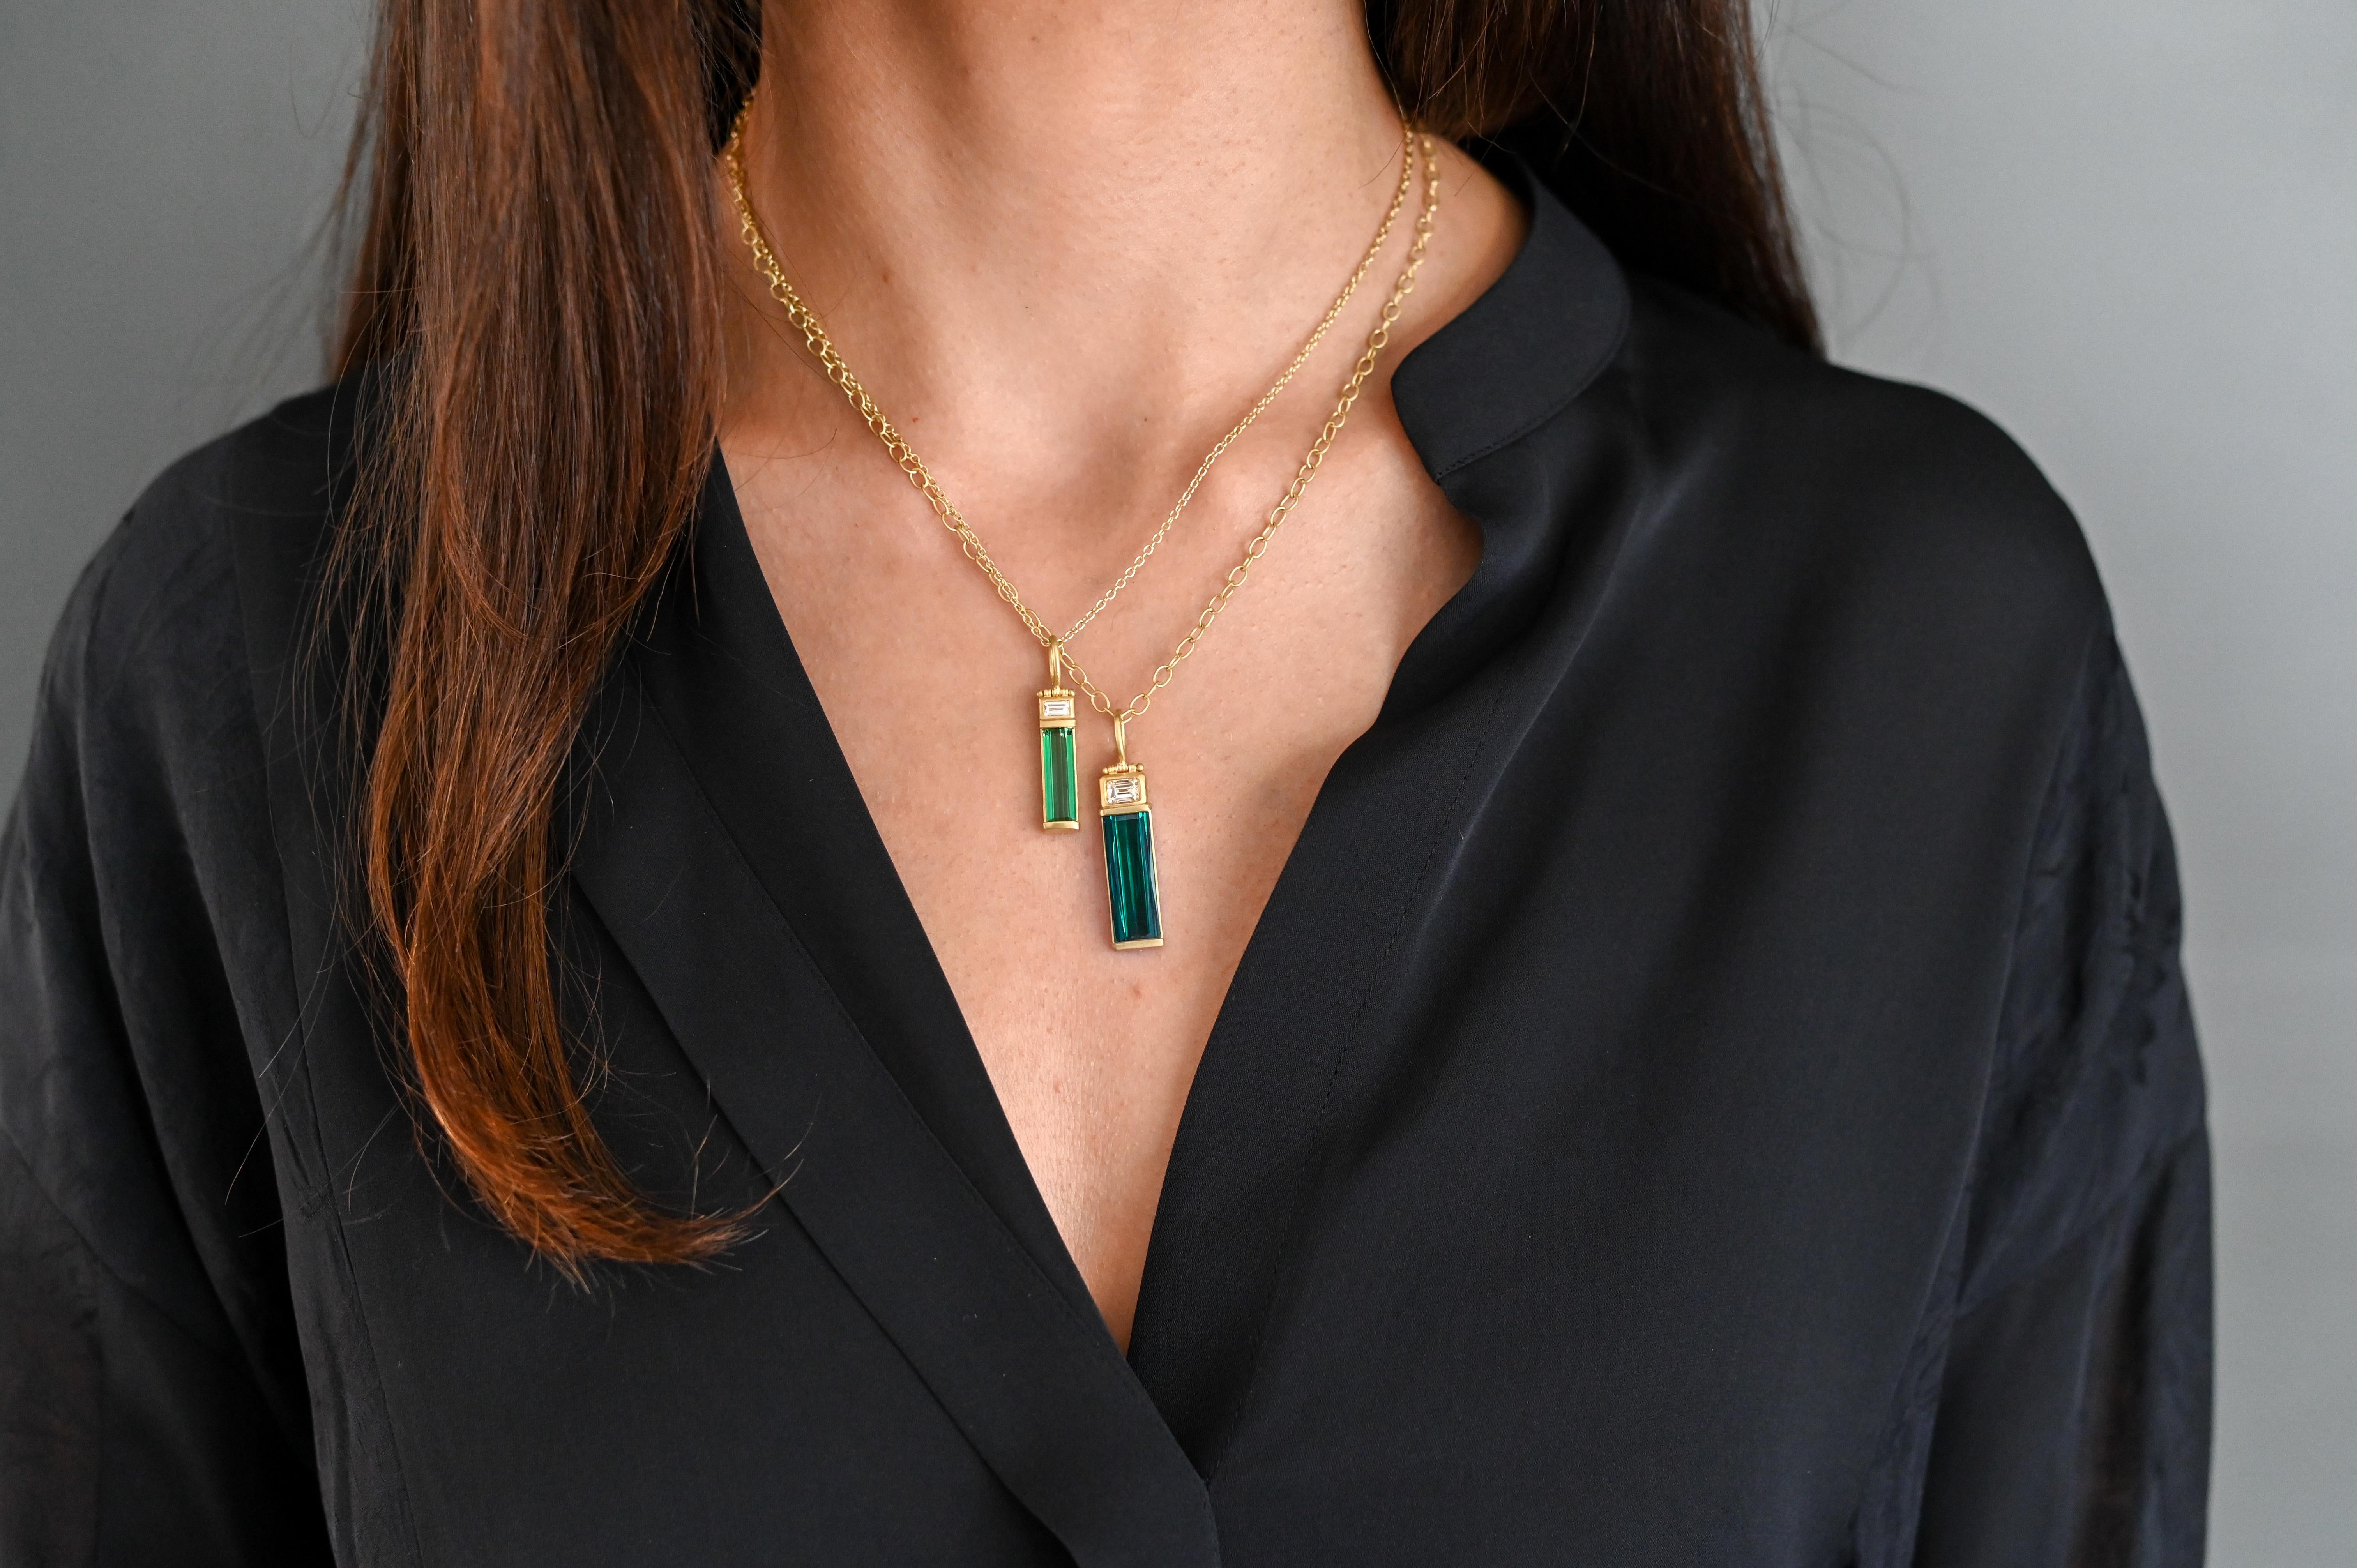 One of a kind and unique, Faye Kim's Tourmaline Bar pendant features a beautiful Blue Tourmaline with a touch of a green undertone. The elongated emerald cut highlights the natural beauty of the intense, even color, and is further highlighted by the